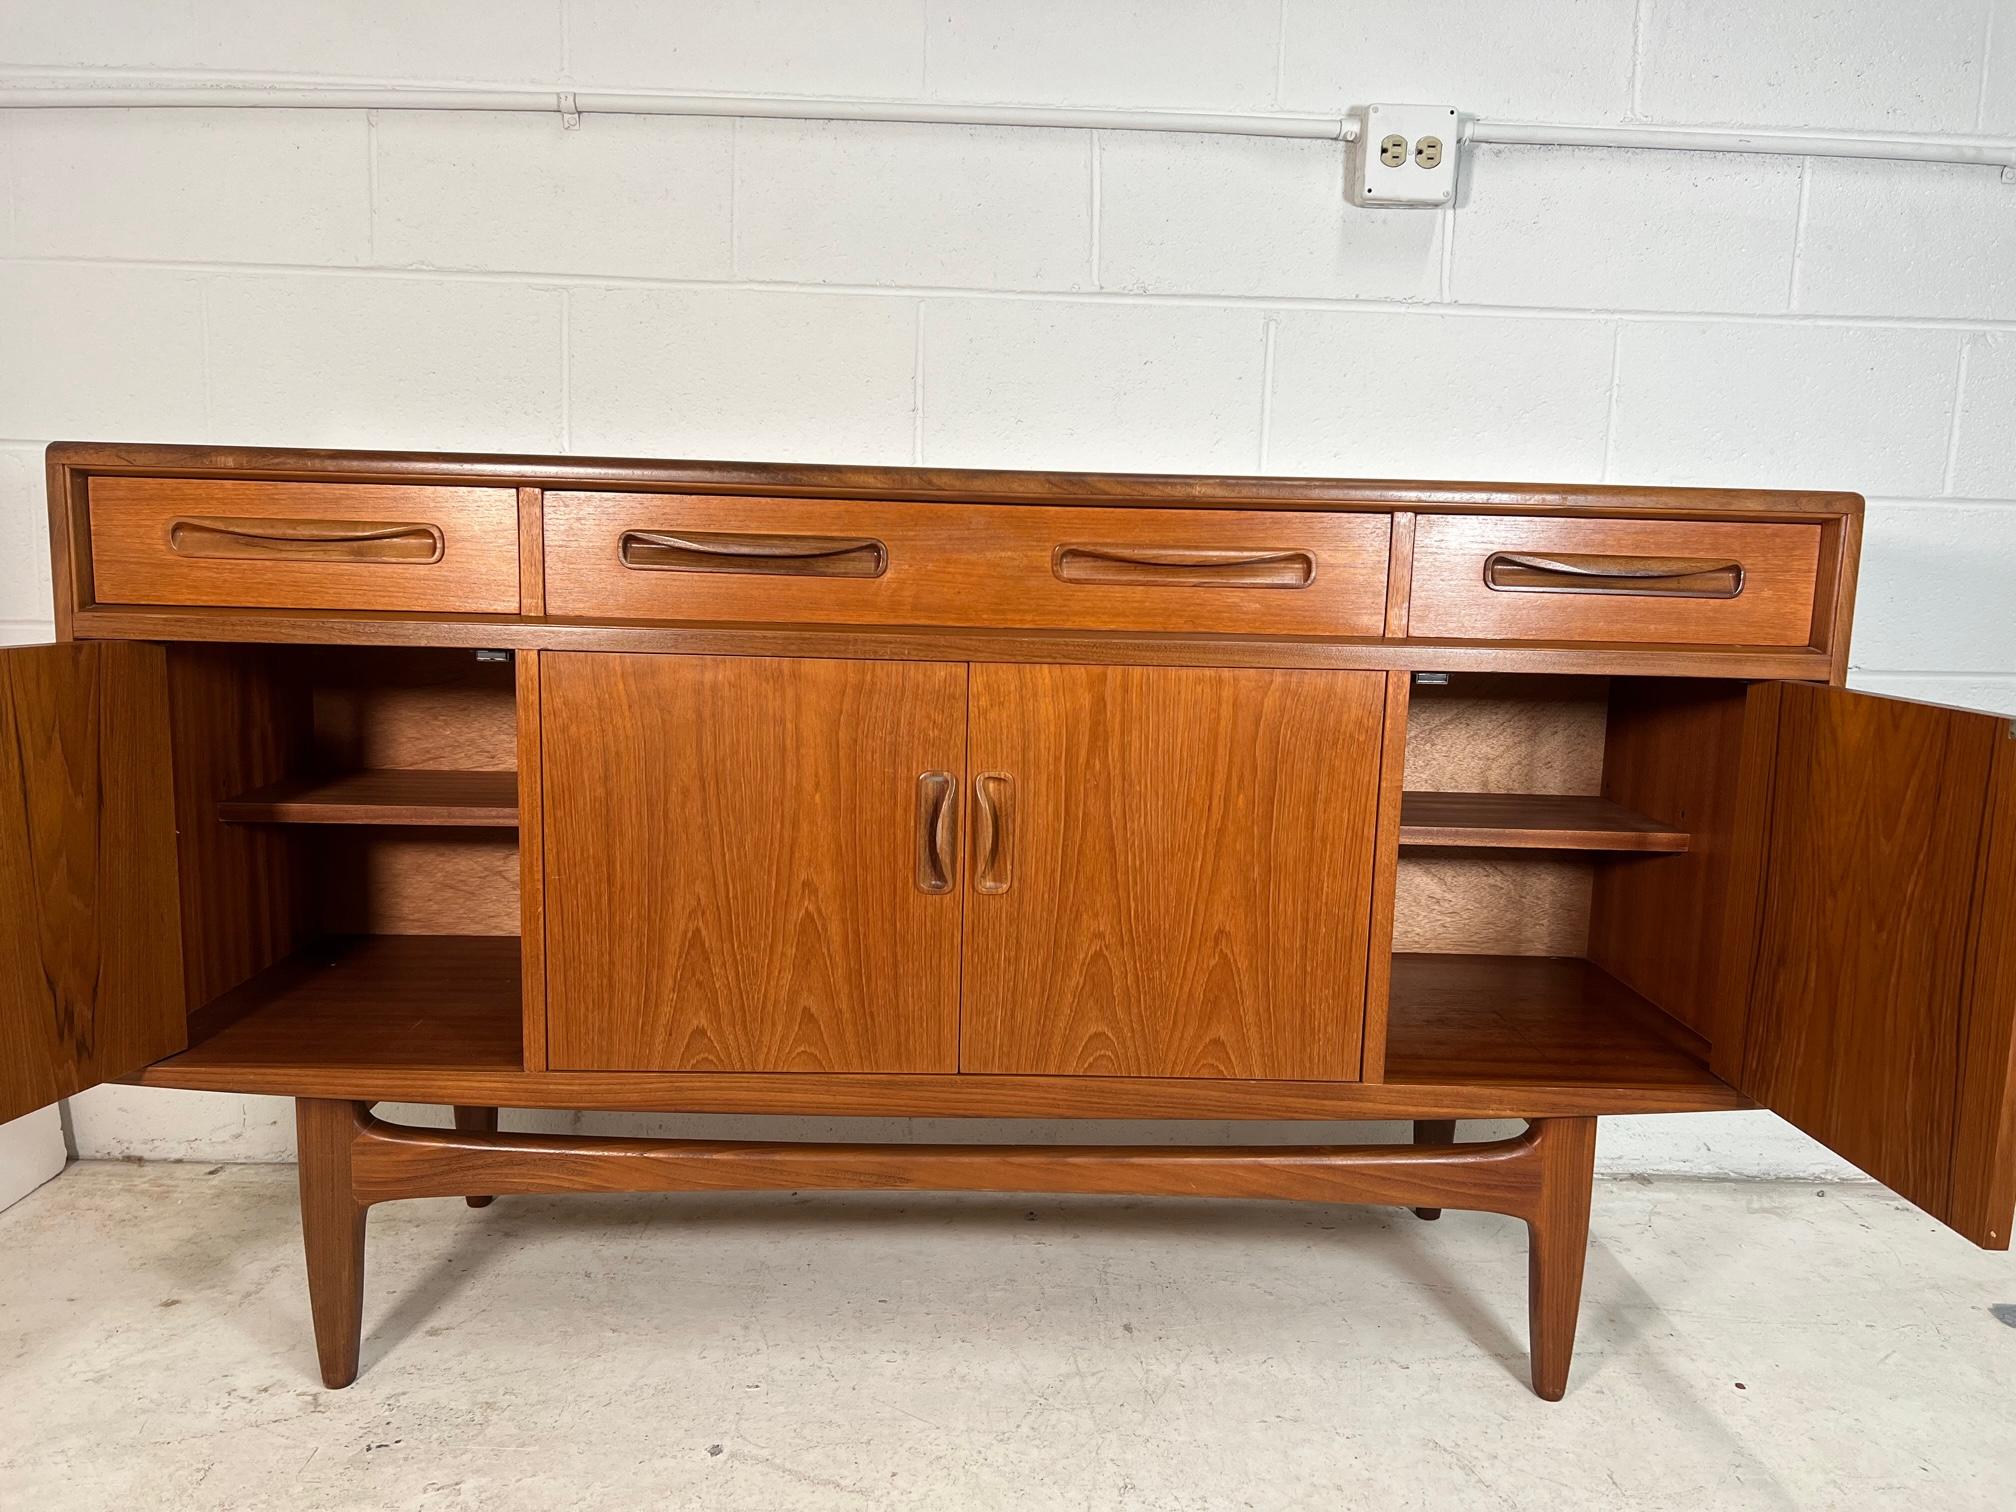 Outstanding small teak credenza. It was designed in the 1960s by Victor Bramwell Wilkins for G Plan's Fresco Range. It has original grey baize and wood dividers in the top drawer. Wood dividers can be removed. Adjustable shelves inside the